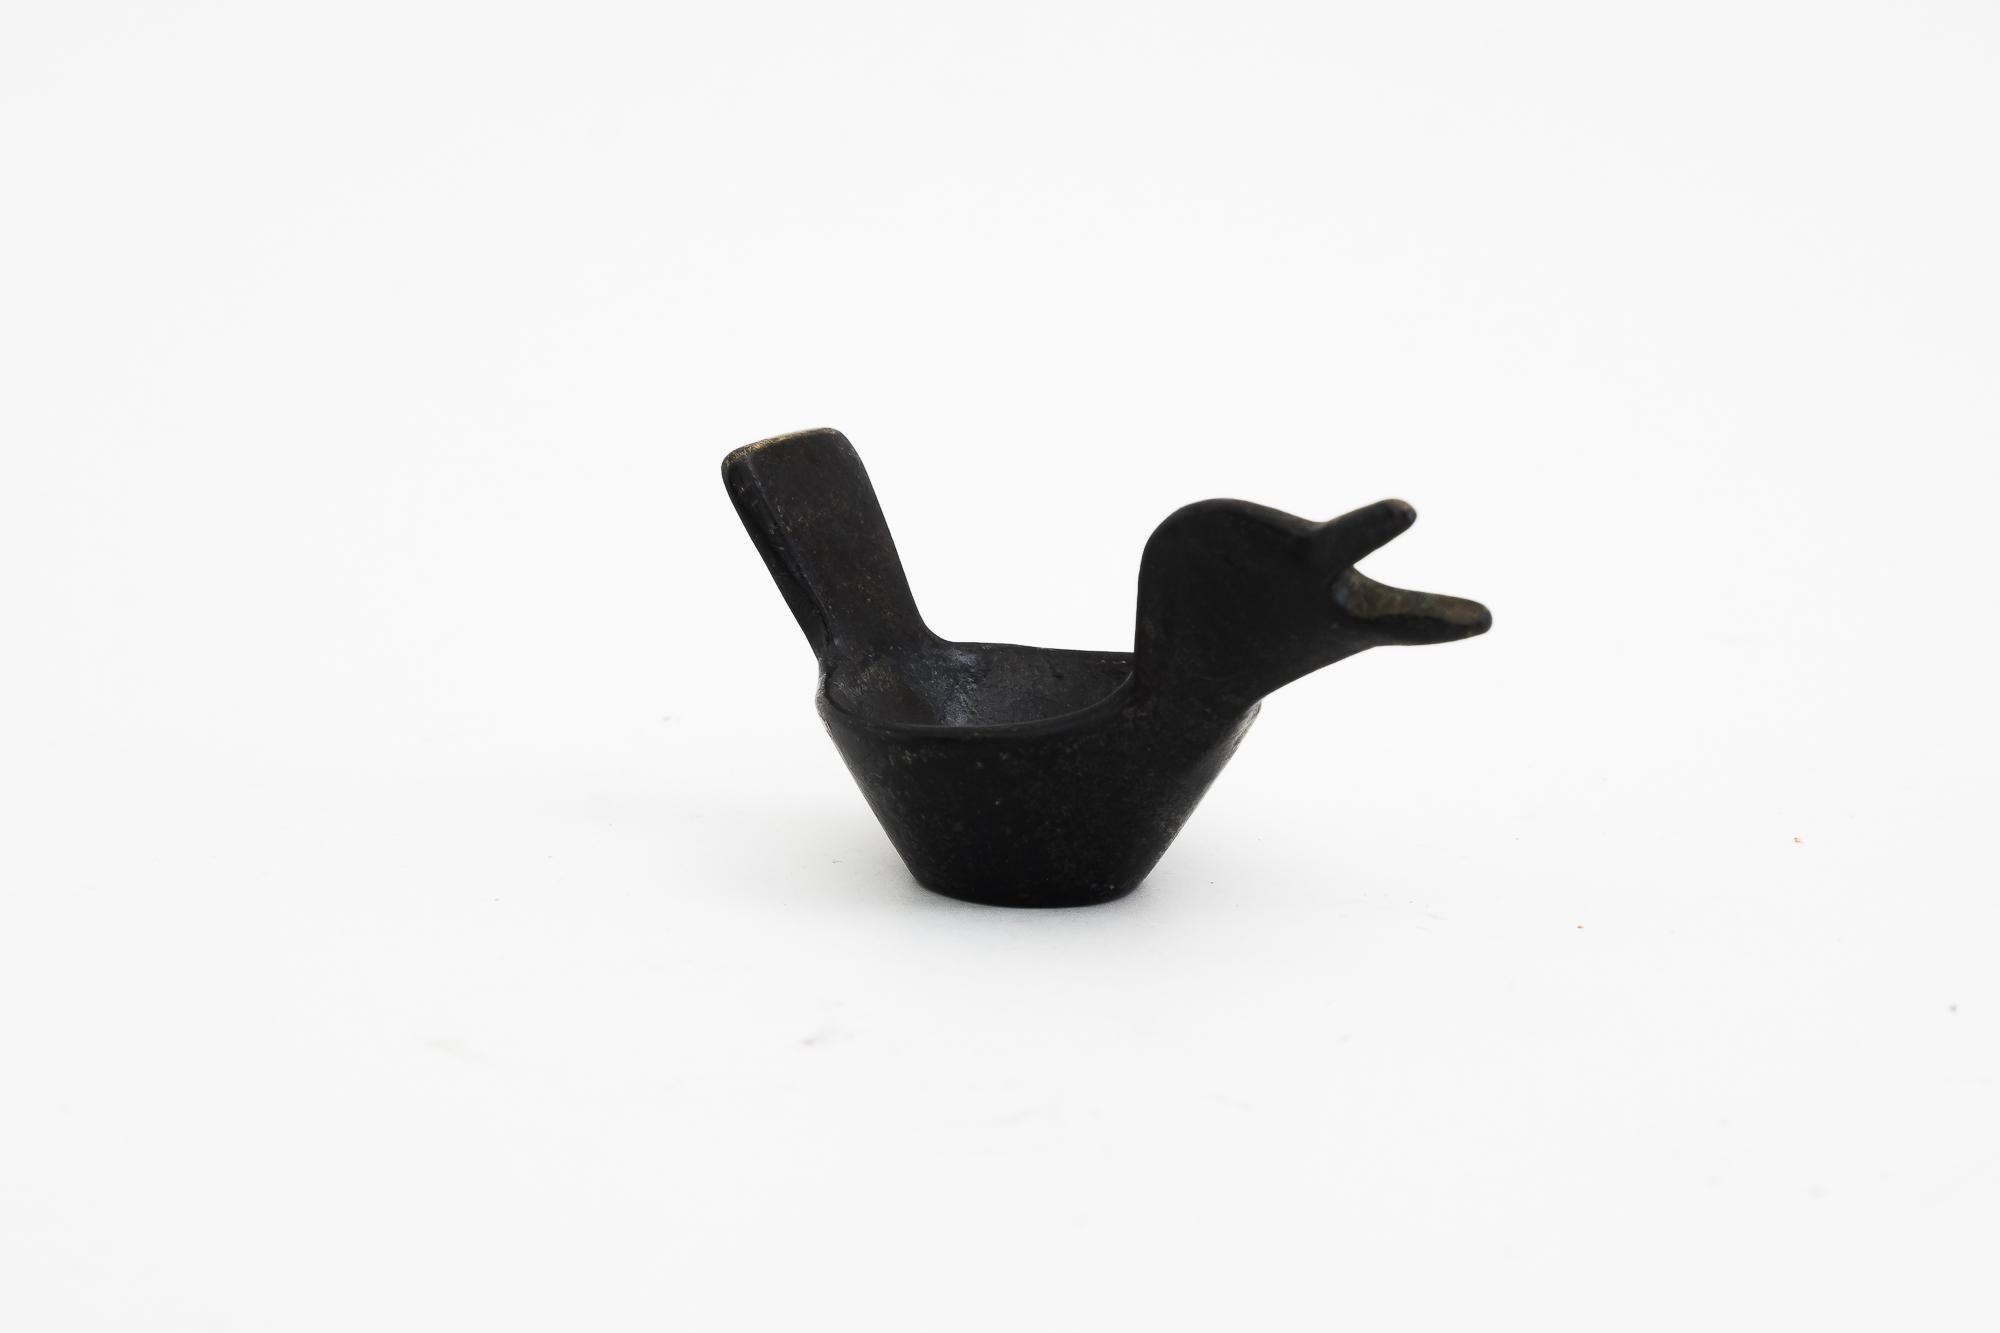 Candle holder (bird) by Walter Bosse, around 1950s
Original condition
The candle is only for the photoshoot (not included).